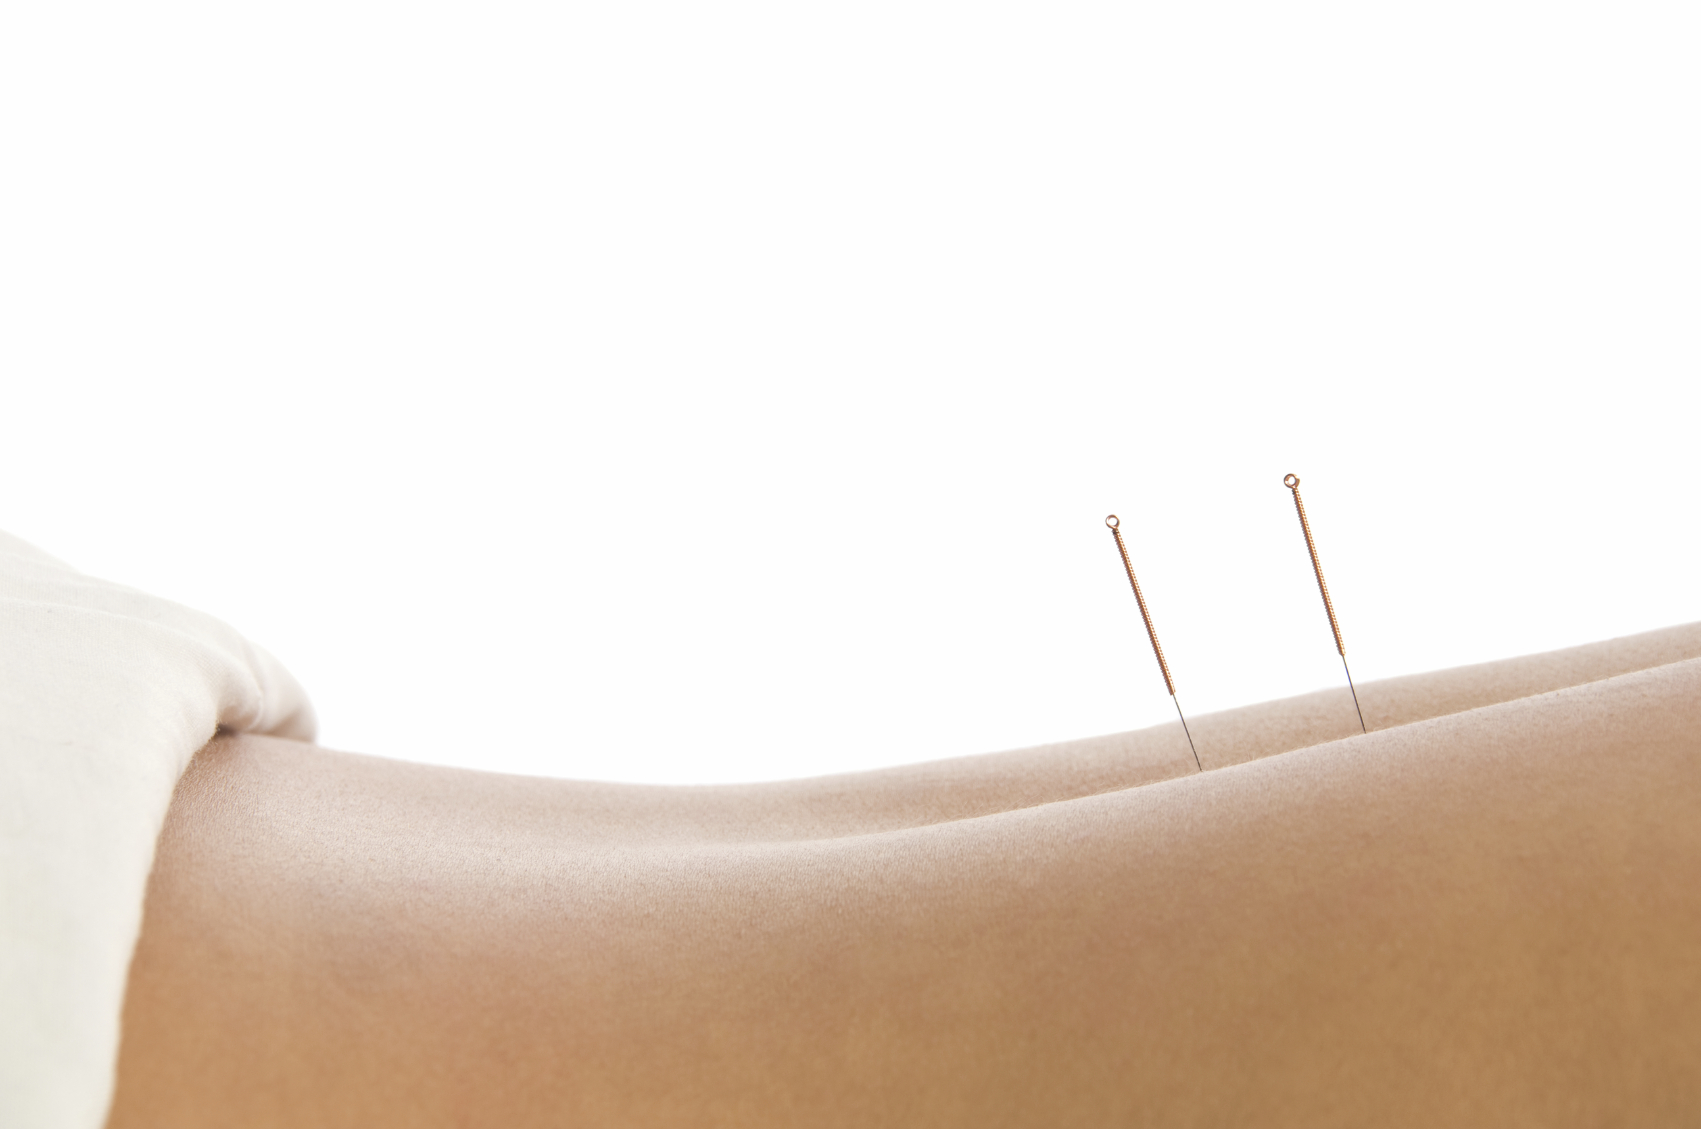 Would acupuncture treatments help chronic low back pain